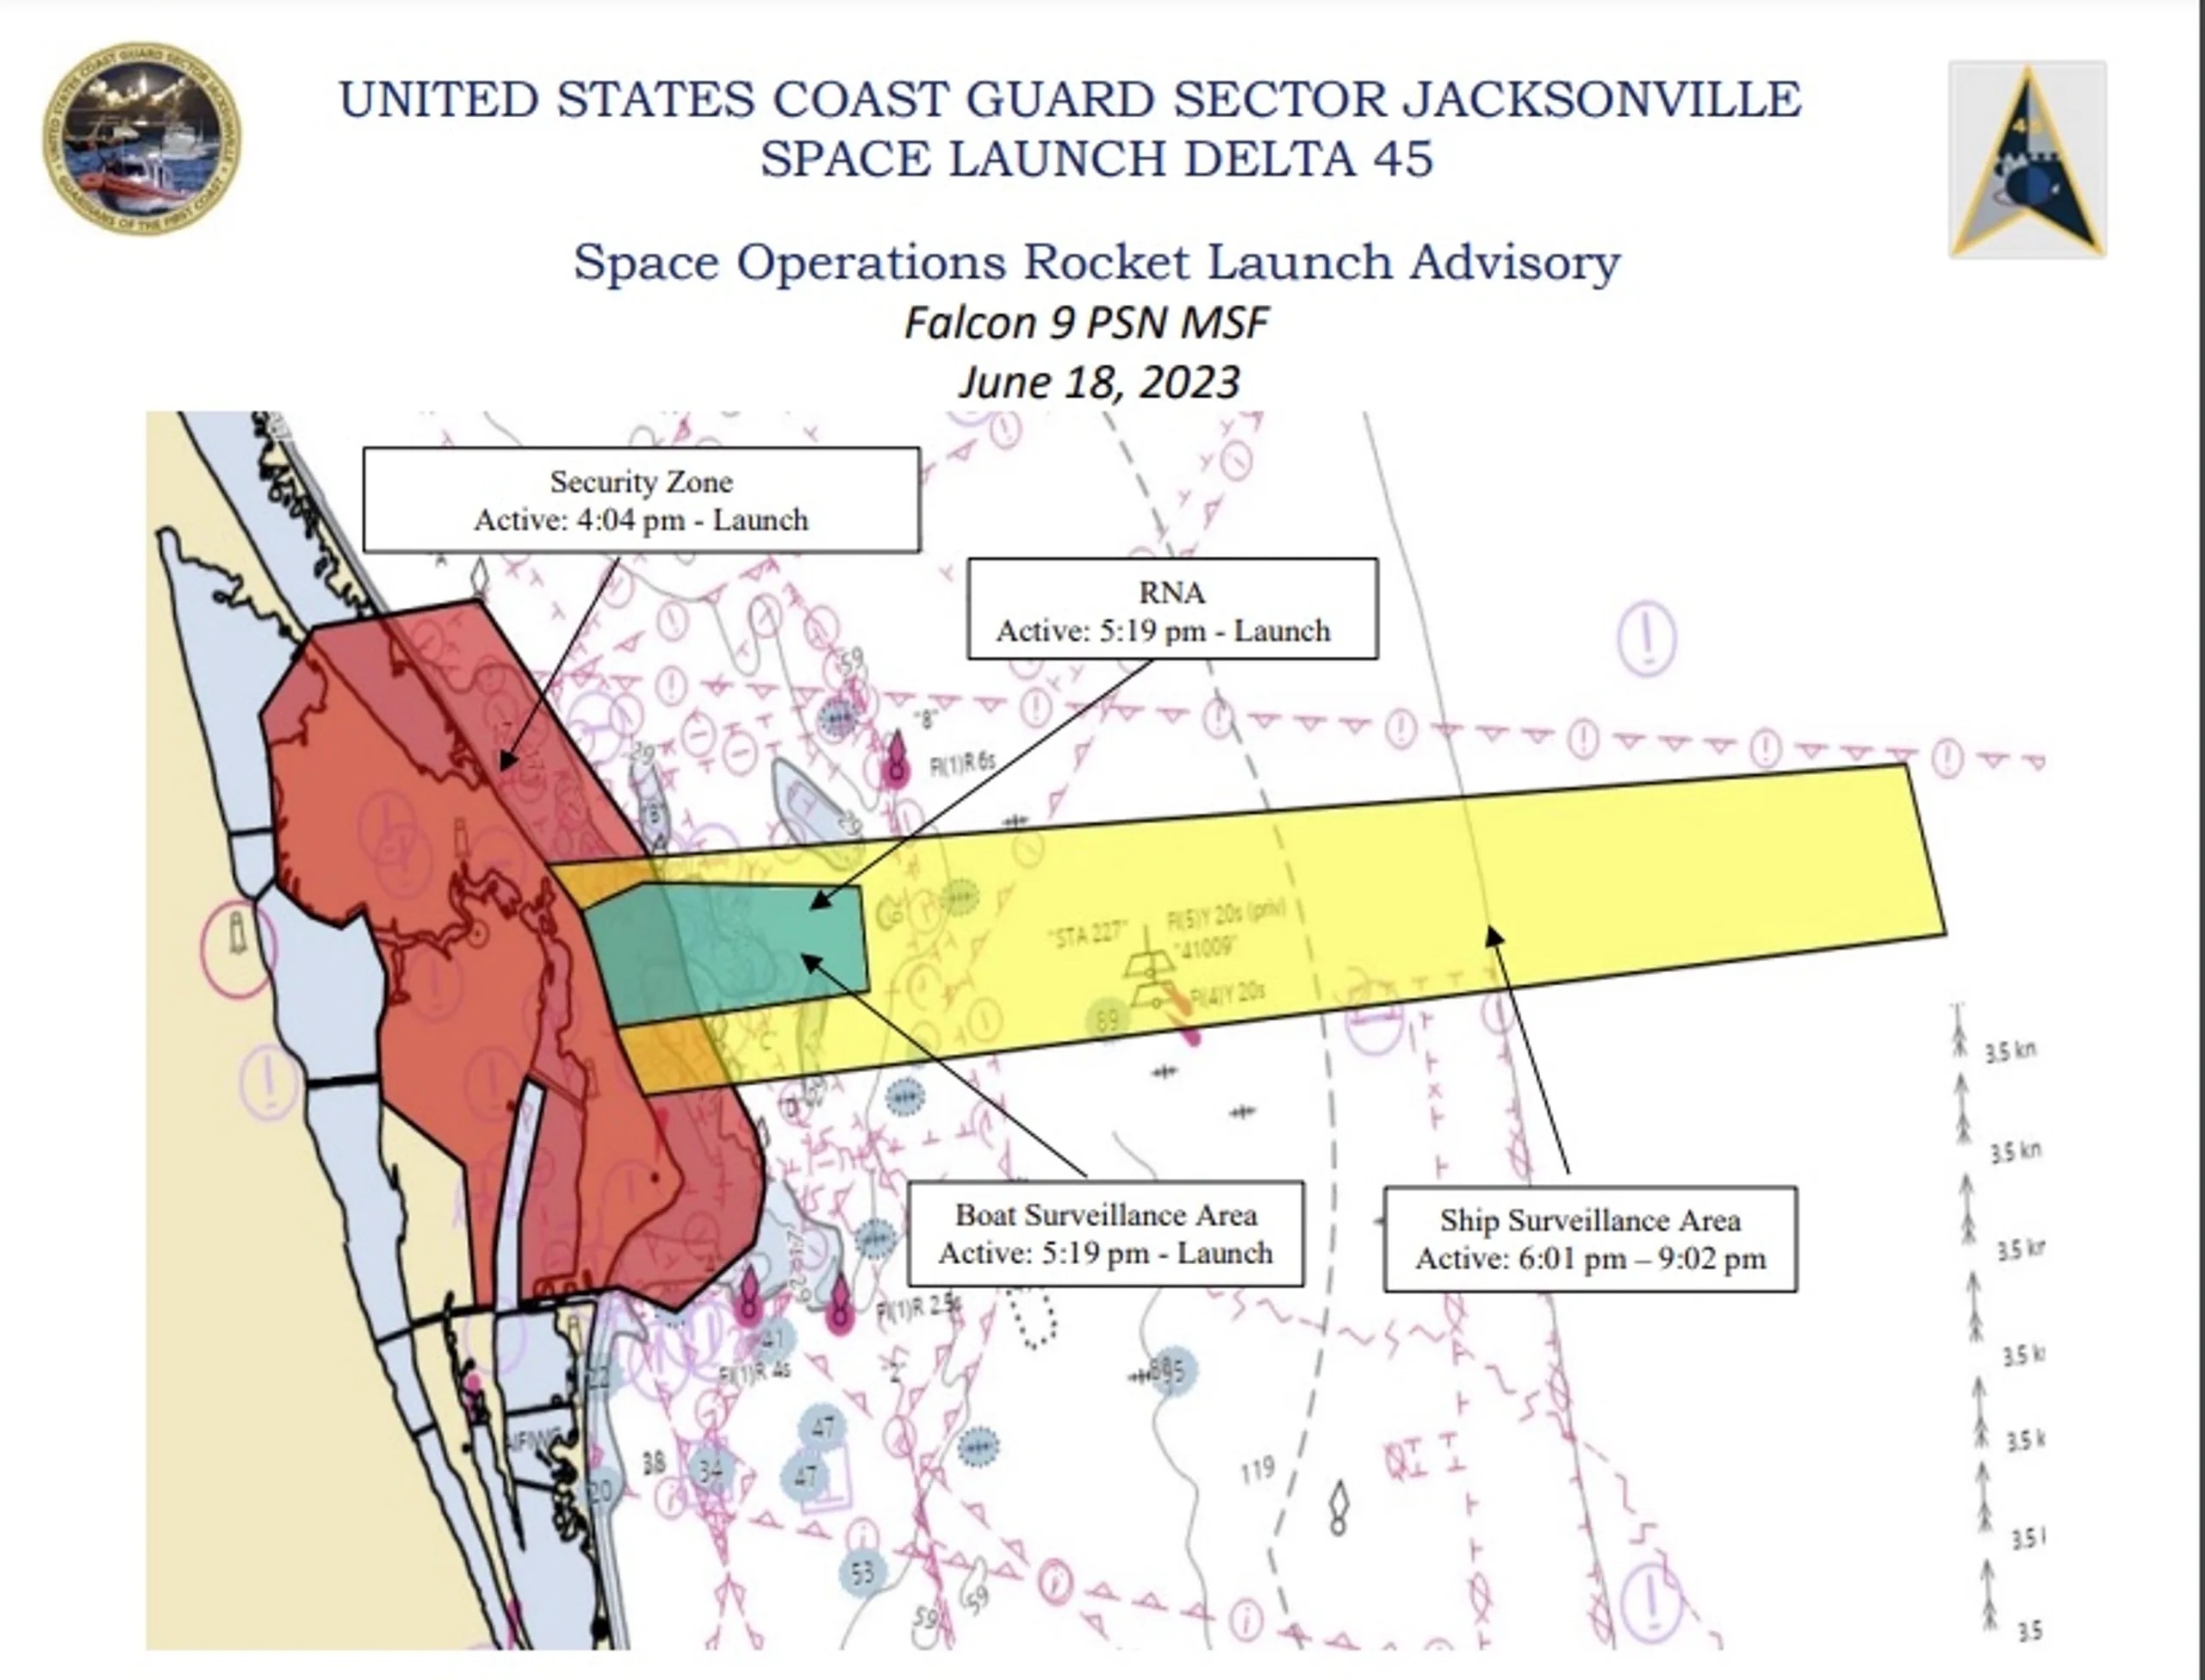 7f6ce6d7-184d-48a3-8bb1-3352b556c778-spacex-falcon-9-launch-exclusion-zones